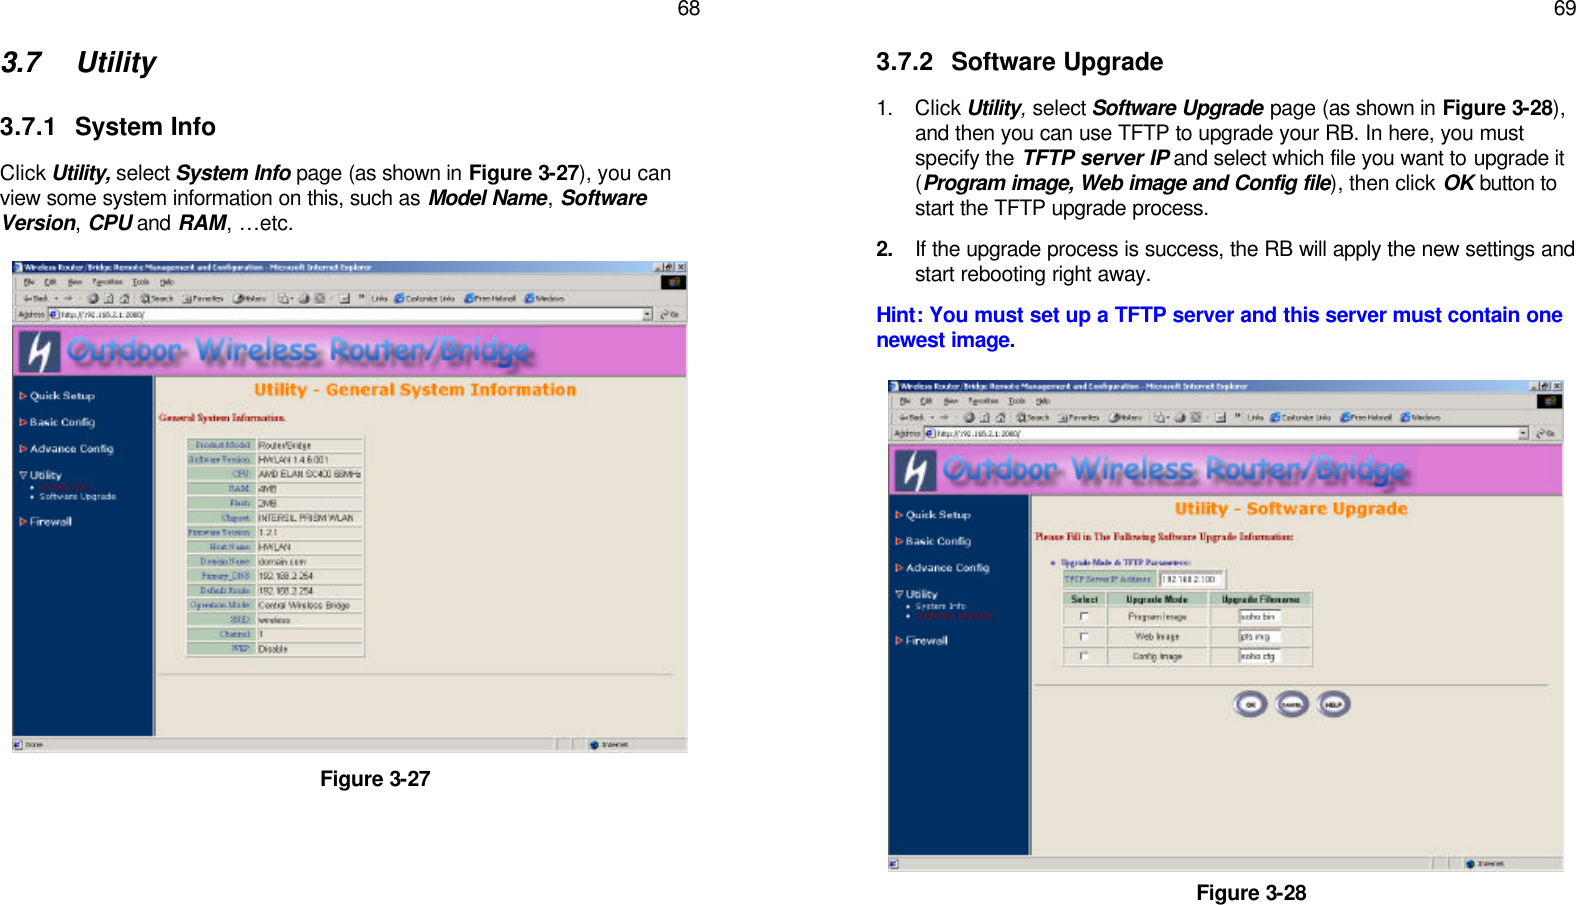   68 3.7 Utility  3.7.1 System Info Click Utility, select System Info page (as shown in Figure 3-27), you can view some system information on this, such as Model Name, Software Version, CPU and RAM, …etc.                      Figure 3-27    69 3.7.2 Software Upgrade 1. Click Utility, select Software Upgrade page (as shown in Figure 3-28), and then you can use TFTP to upgrade your RB. In here, you must specify the TFTP server IP and select which file you want to upgrade it (Program image, Web image and Config file), then click OK button to start the TFTP upgrade process.  2. If the upgrade process is success, the RB will apply the new settings and start rebooting right away.  Hint: You must set up a TFTP server and this server must contain one newest image.                      Figure 3-28   